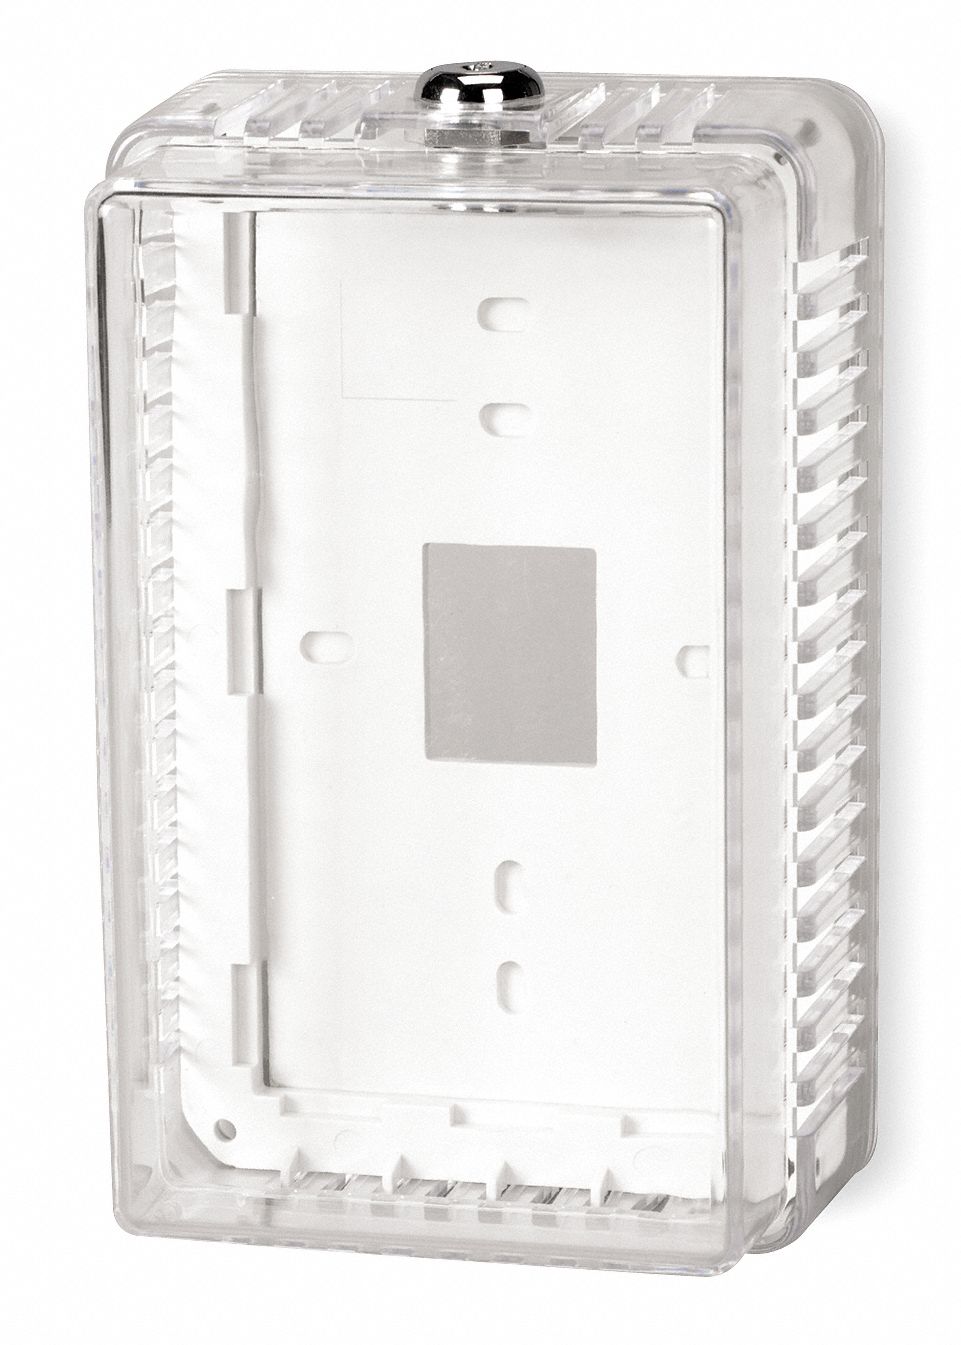 6 Grainger Universal Thermostat Guard Clear Plastic Locking Cover 13G329 for sale online